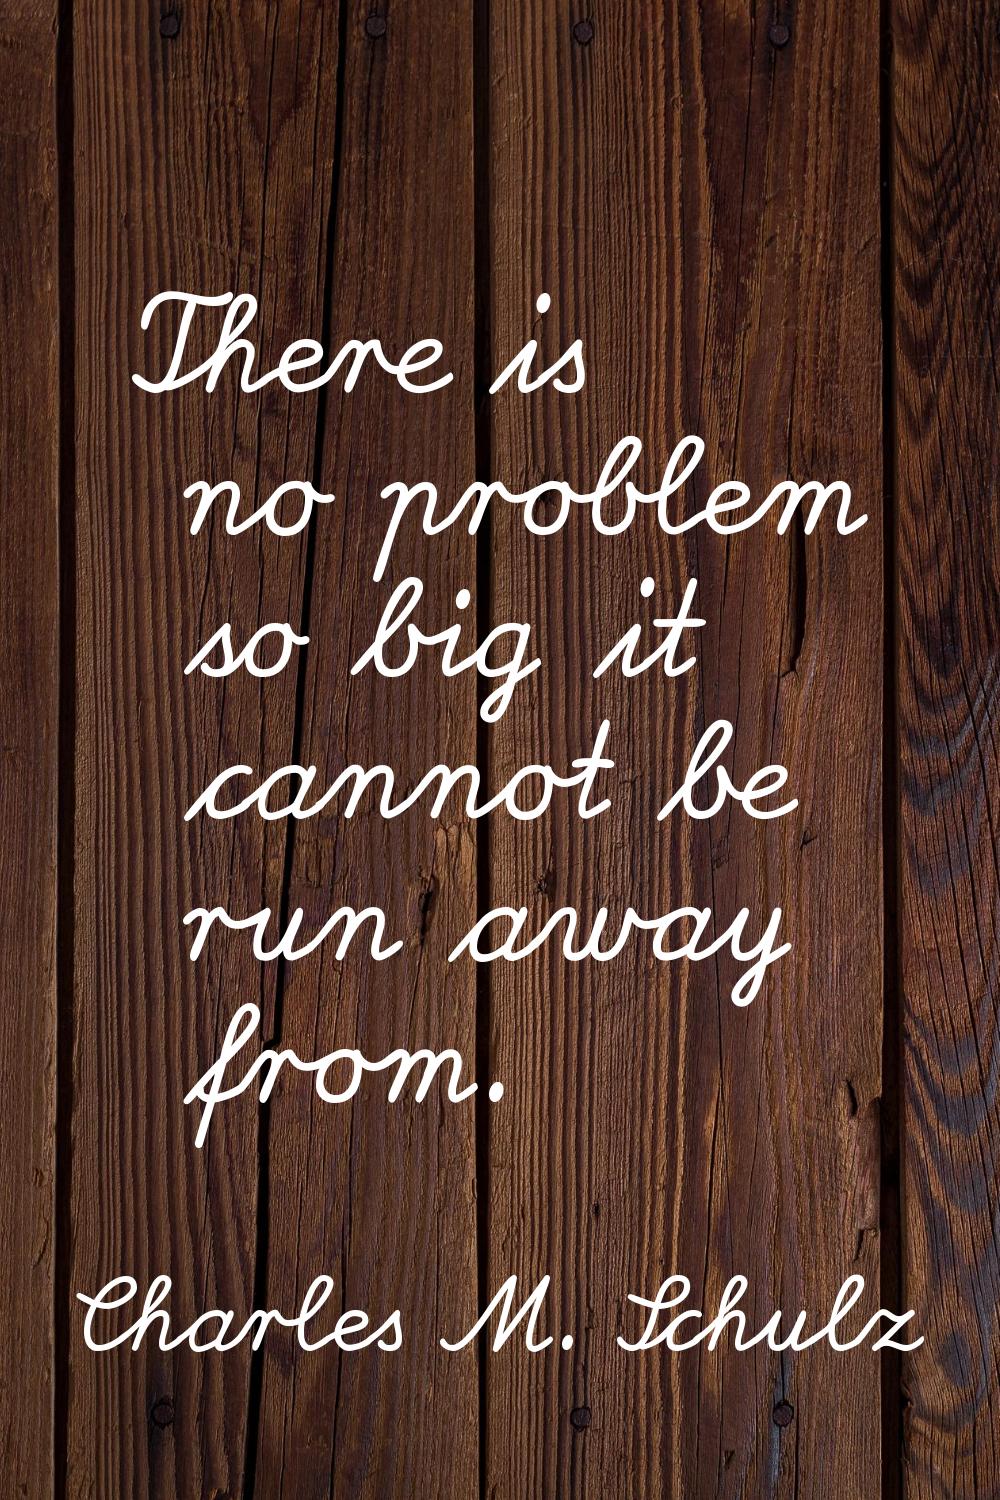 There is no problem so big it cannot be run away from.